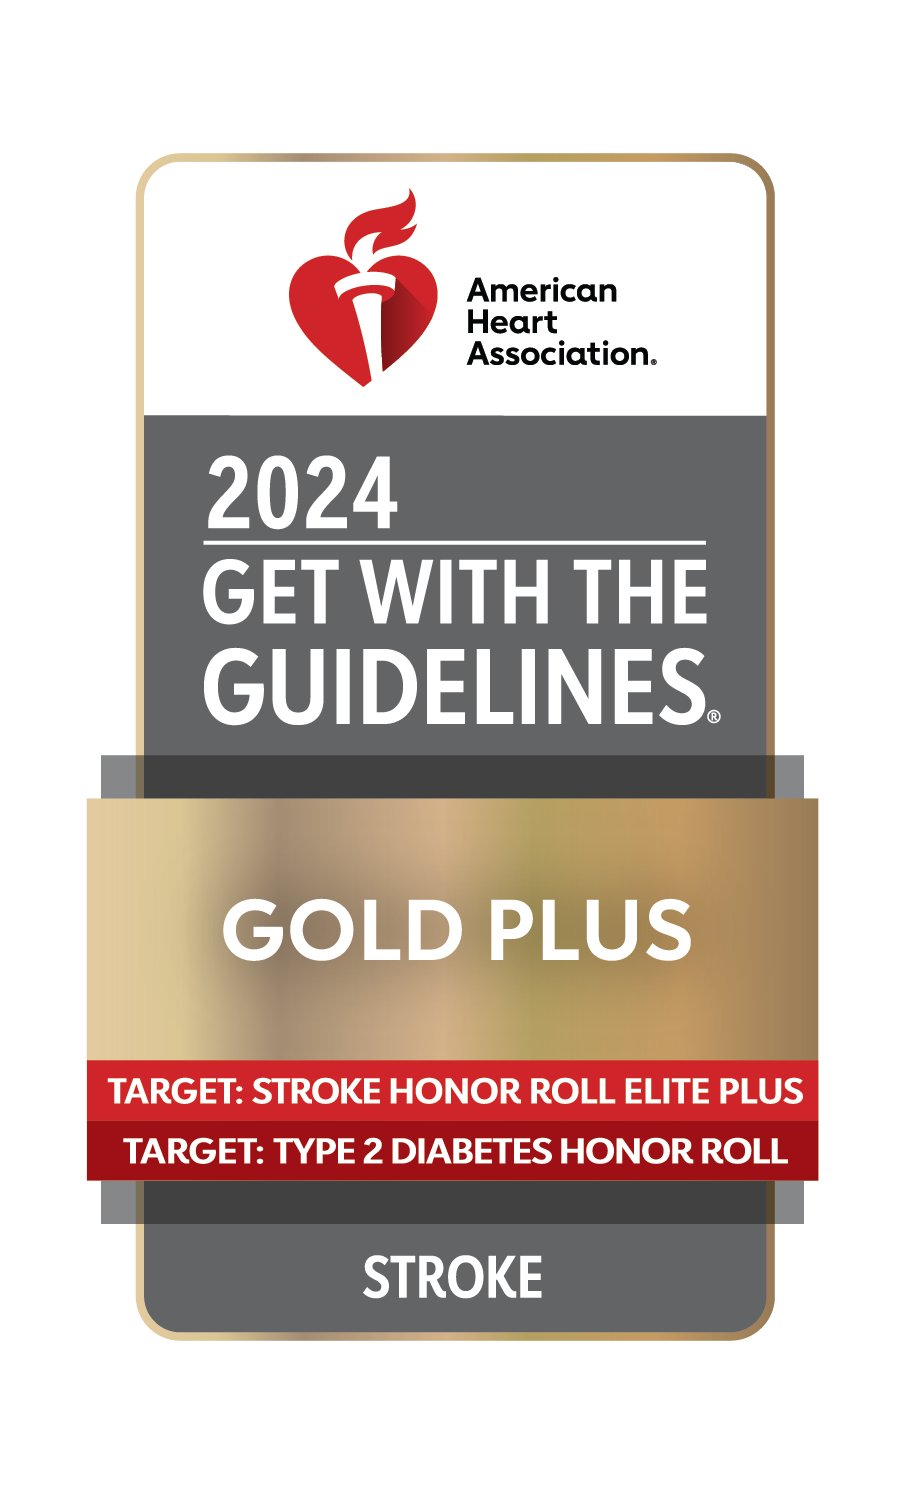 2024 Get With the Guidelines Gold Pluse Stroke award logo.